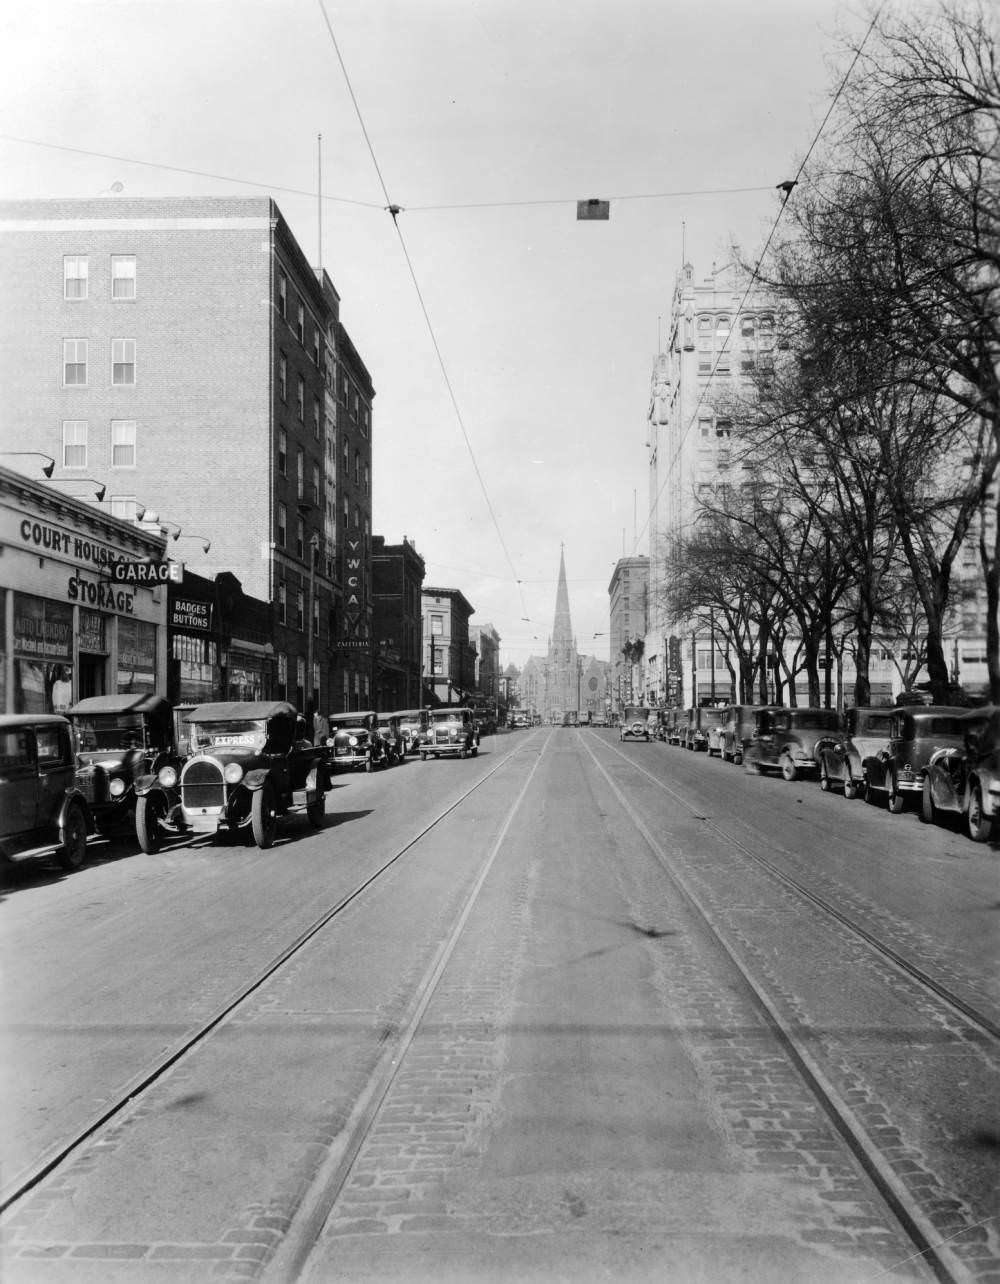 View of Tremont Street featuring Trinity Methodist Church, Republic Building, and YWCA among others, 1900s